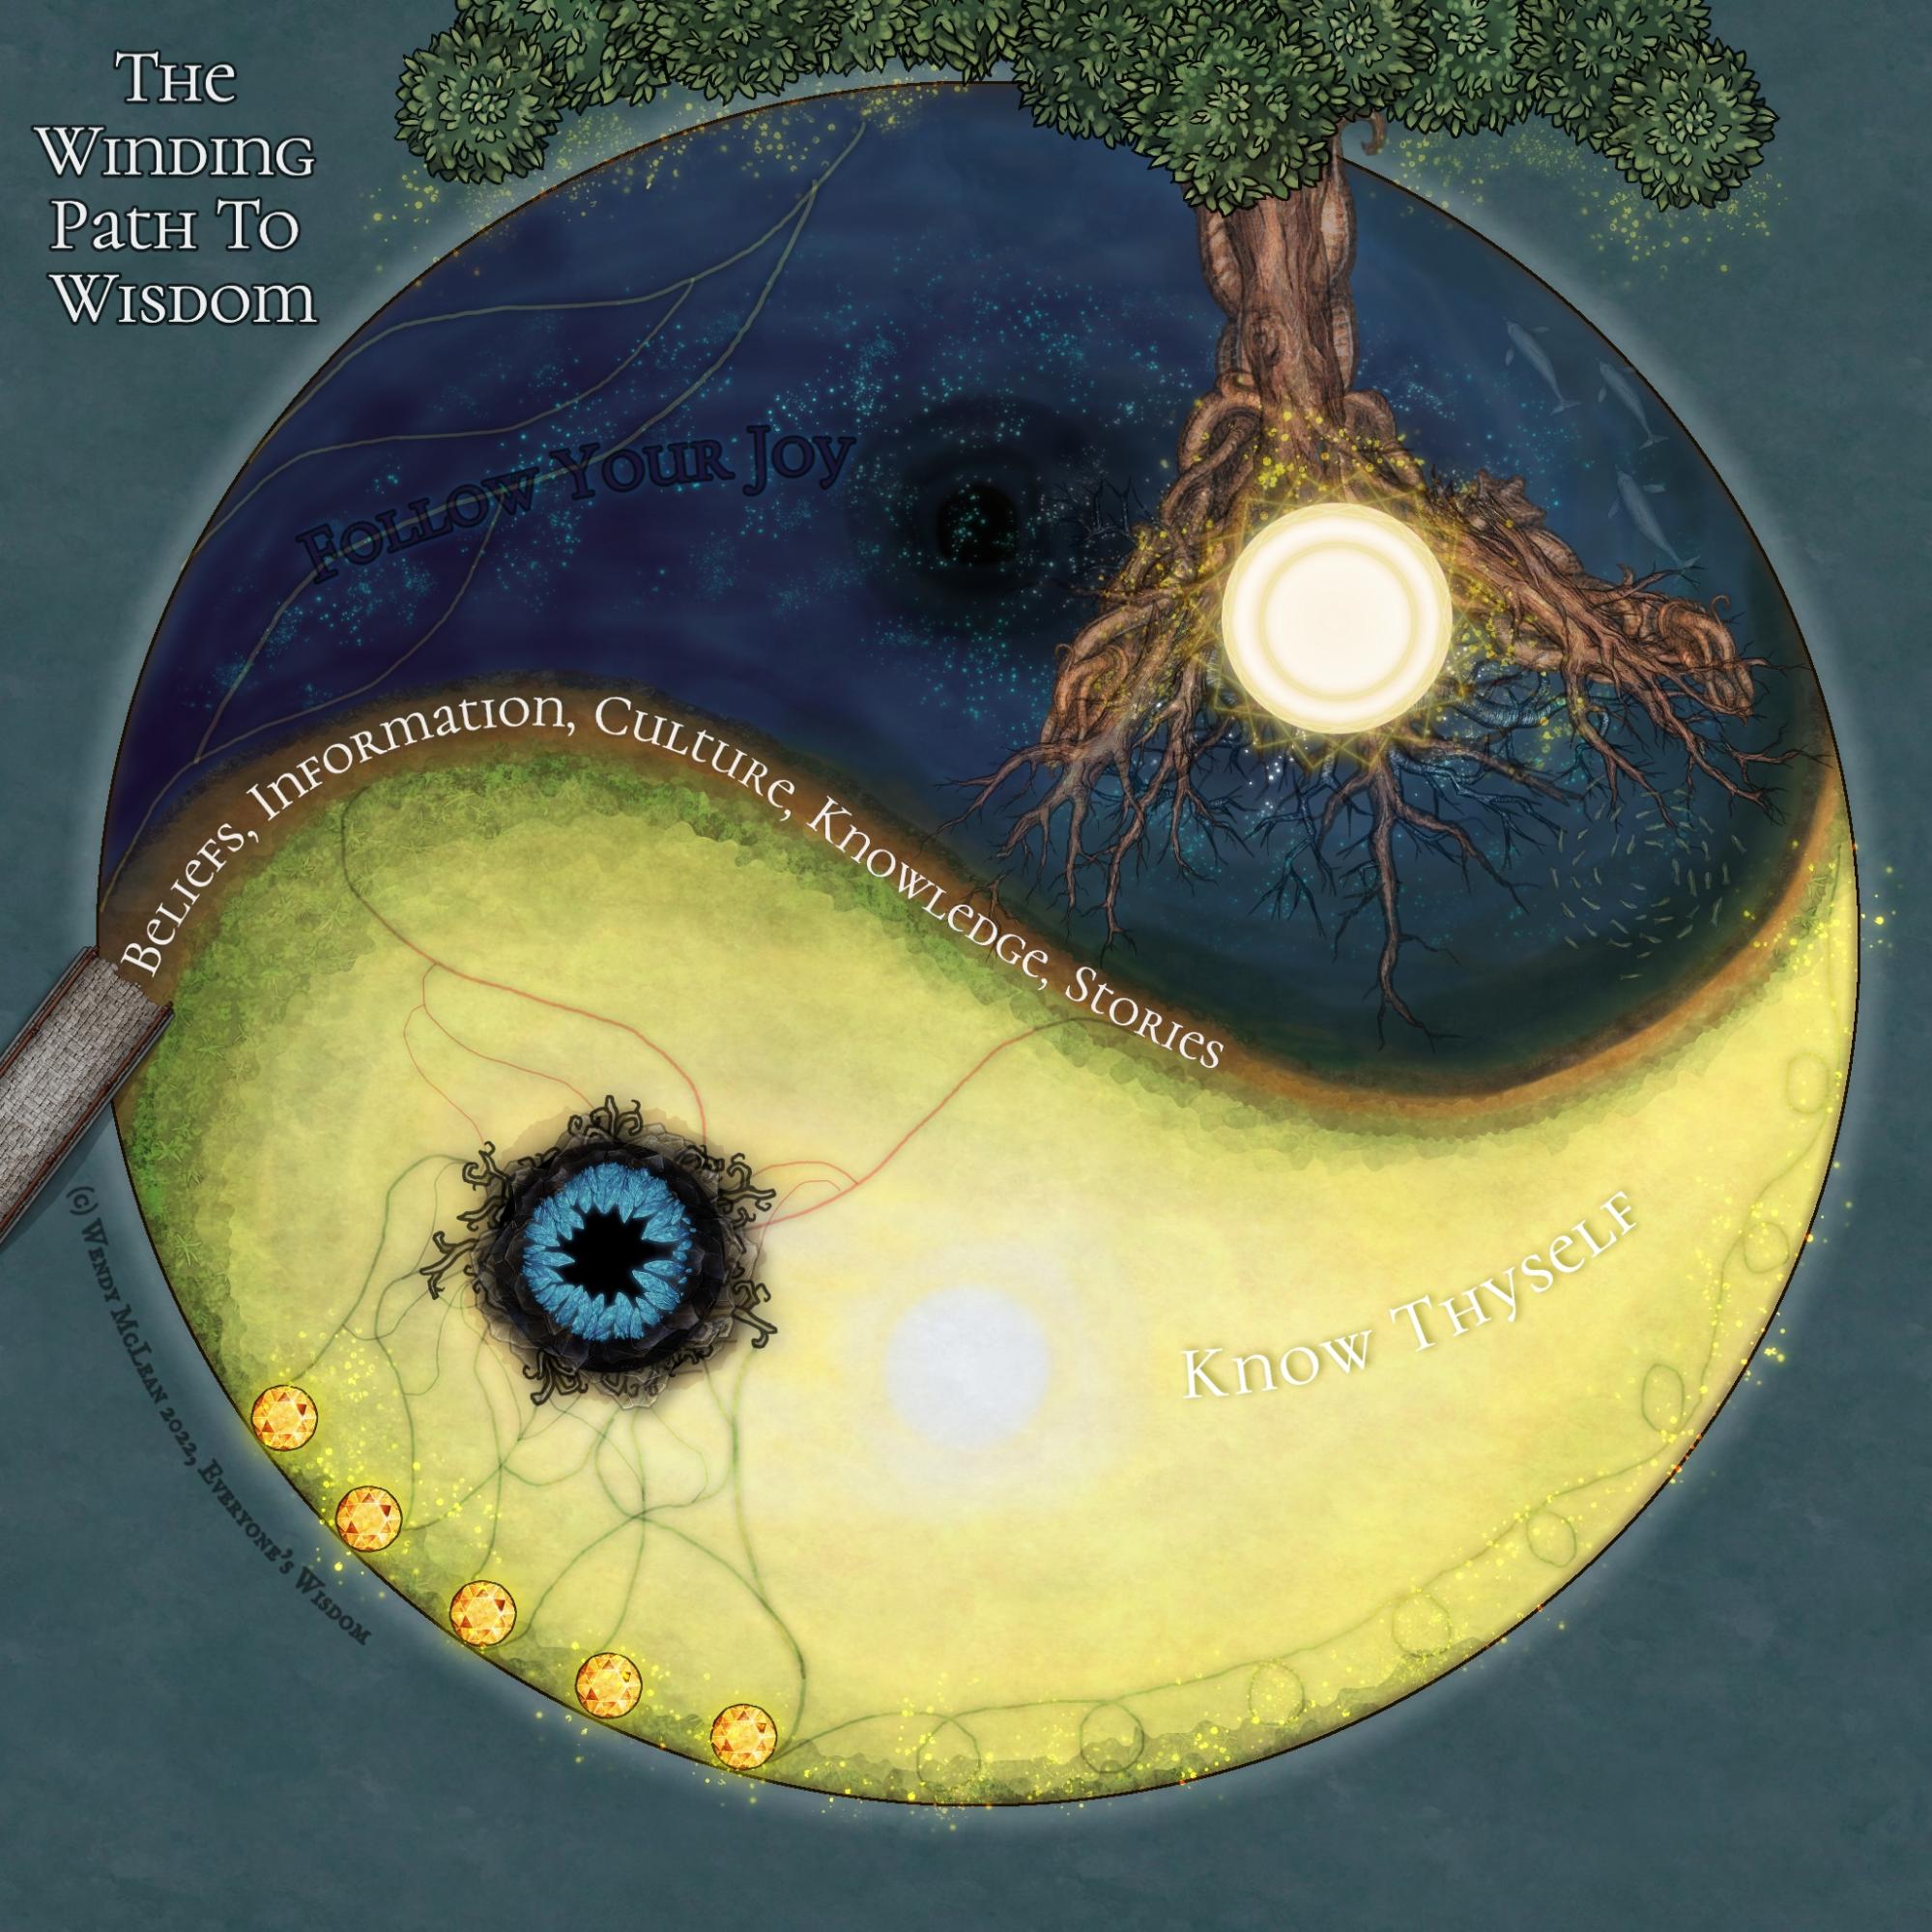 A graphic representation of The Winding Path to Wisdom. It's sort of a yin-yang symbol, dark blue at the top, and bright yellow on the bottom. There are organic features such as a big tree with visible roots.